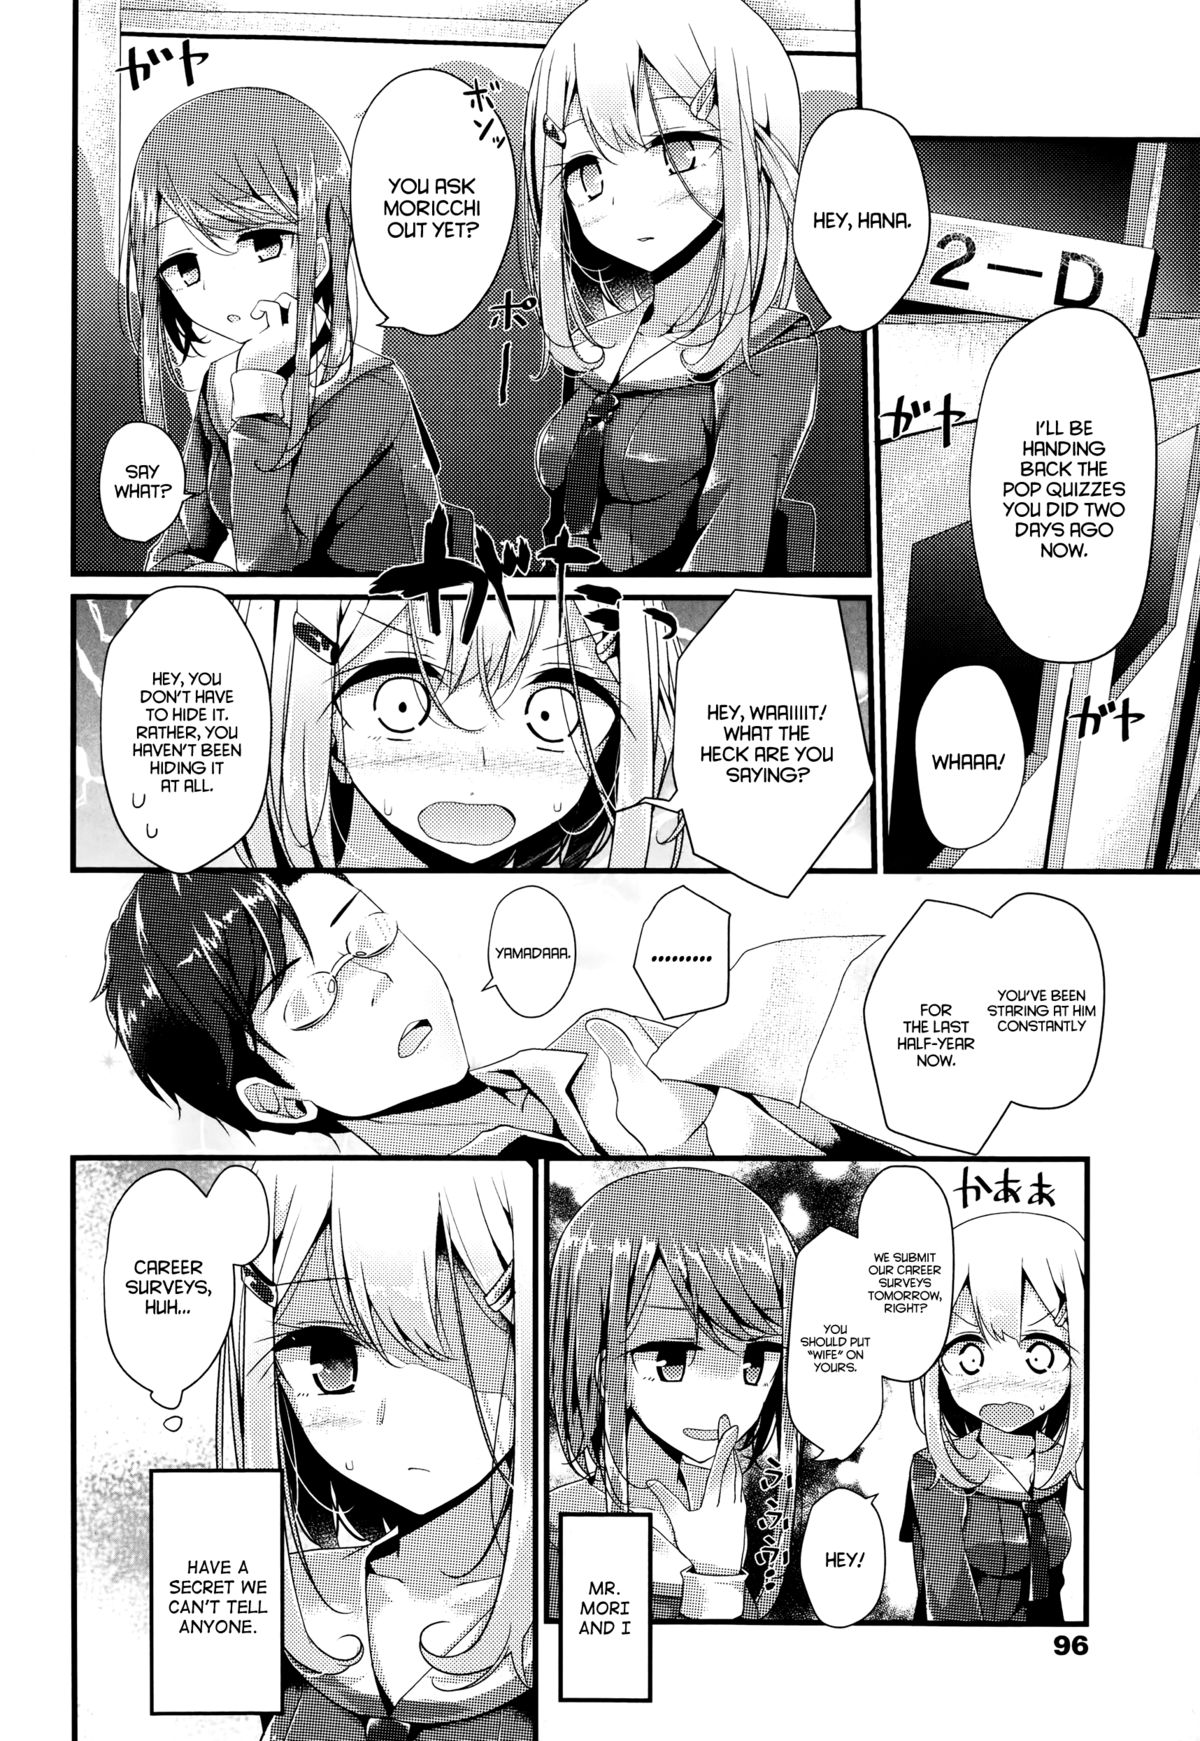 [Oouso] Olfactophilia (Girls forM Vol. 06) [English] =LWB= page 2 full